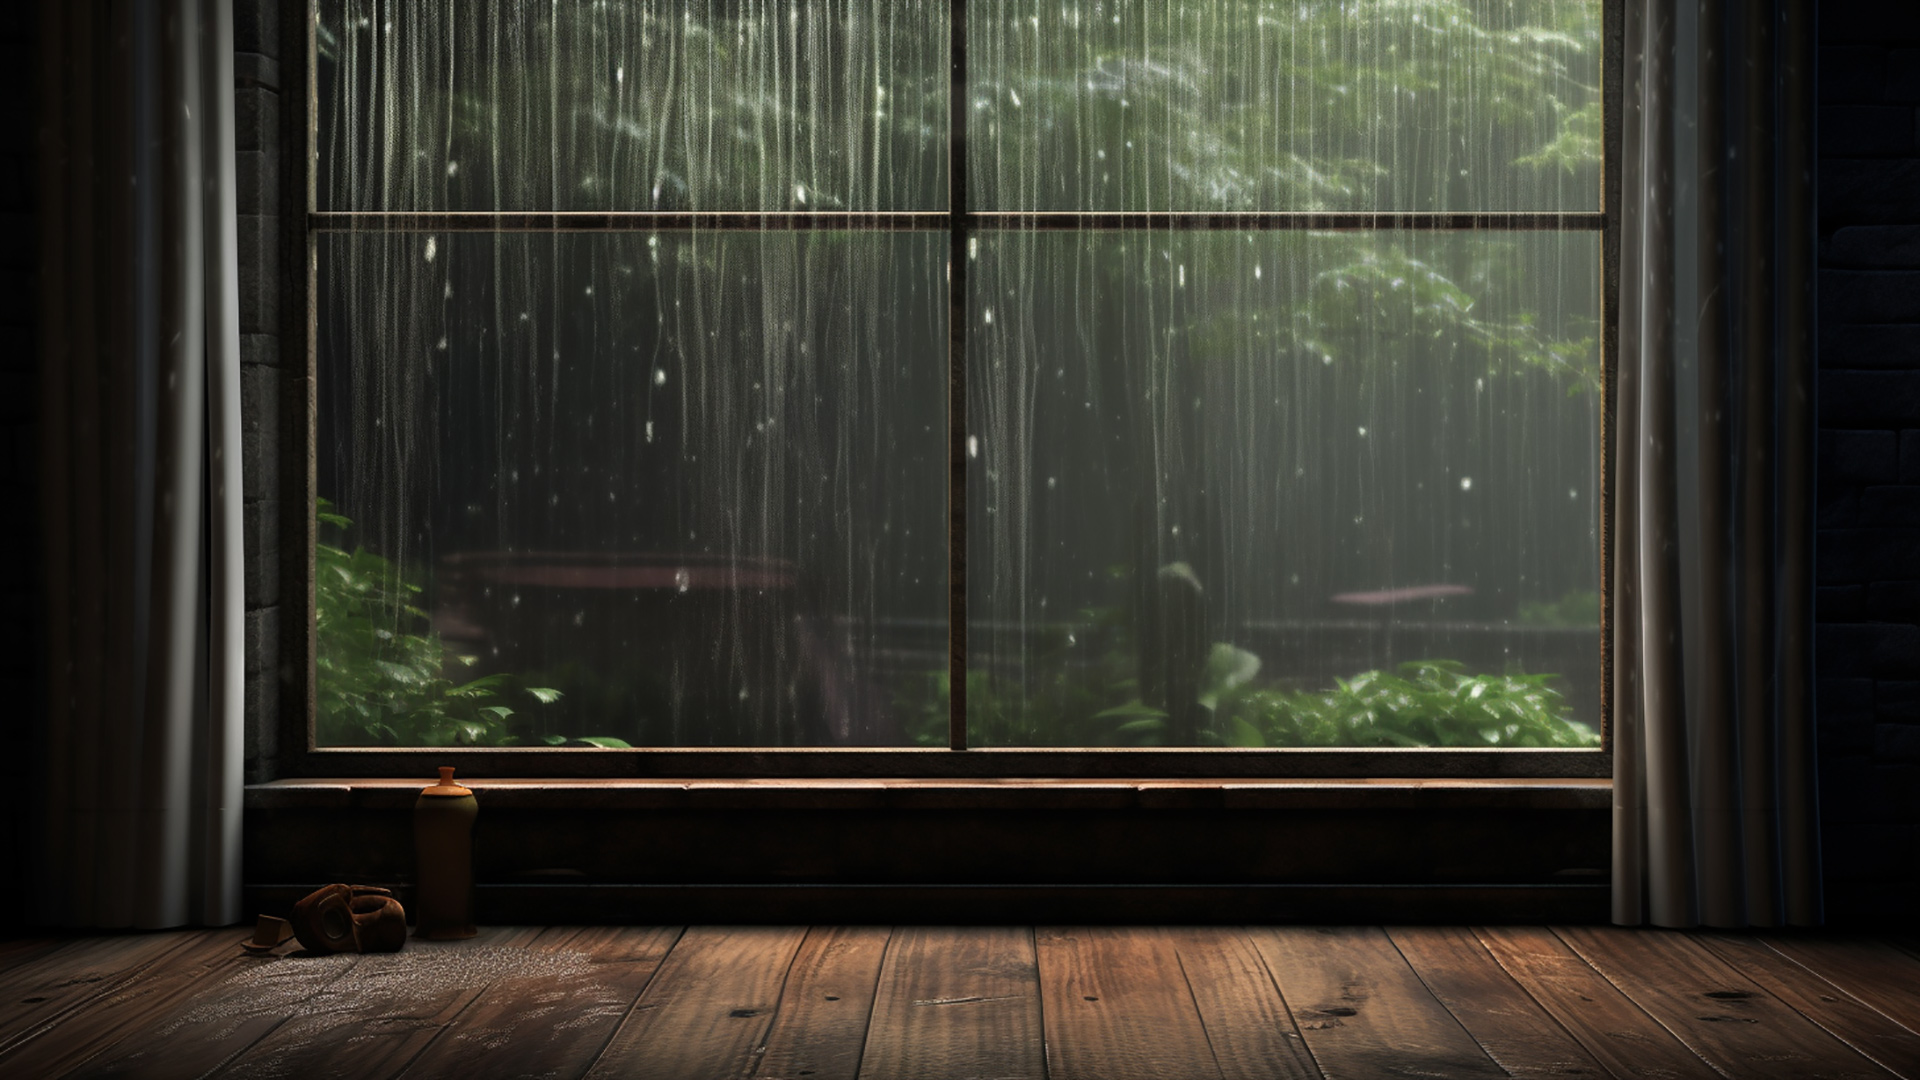 Captivating rainy view wallpapers to boost productivity indoors